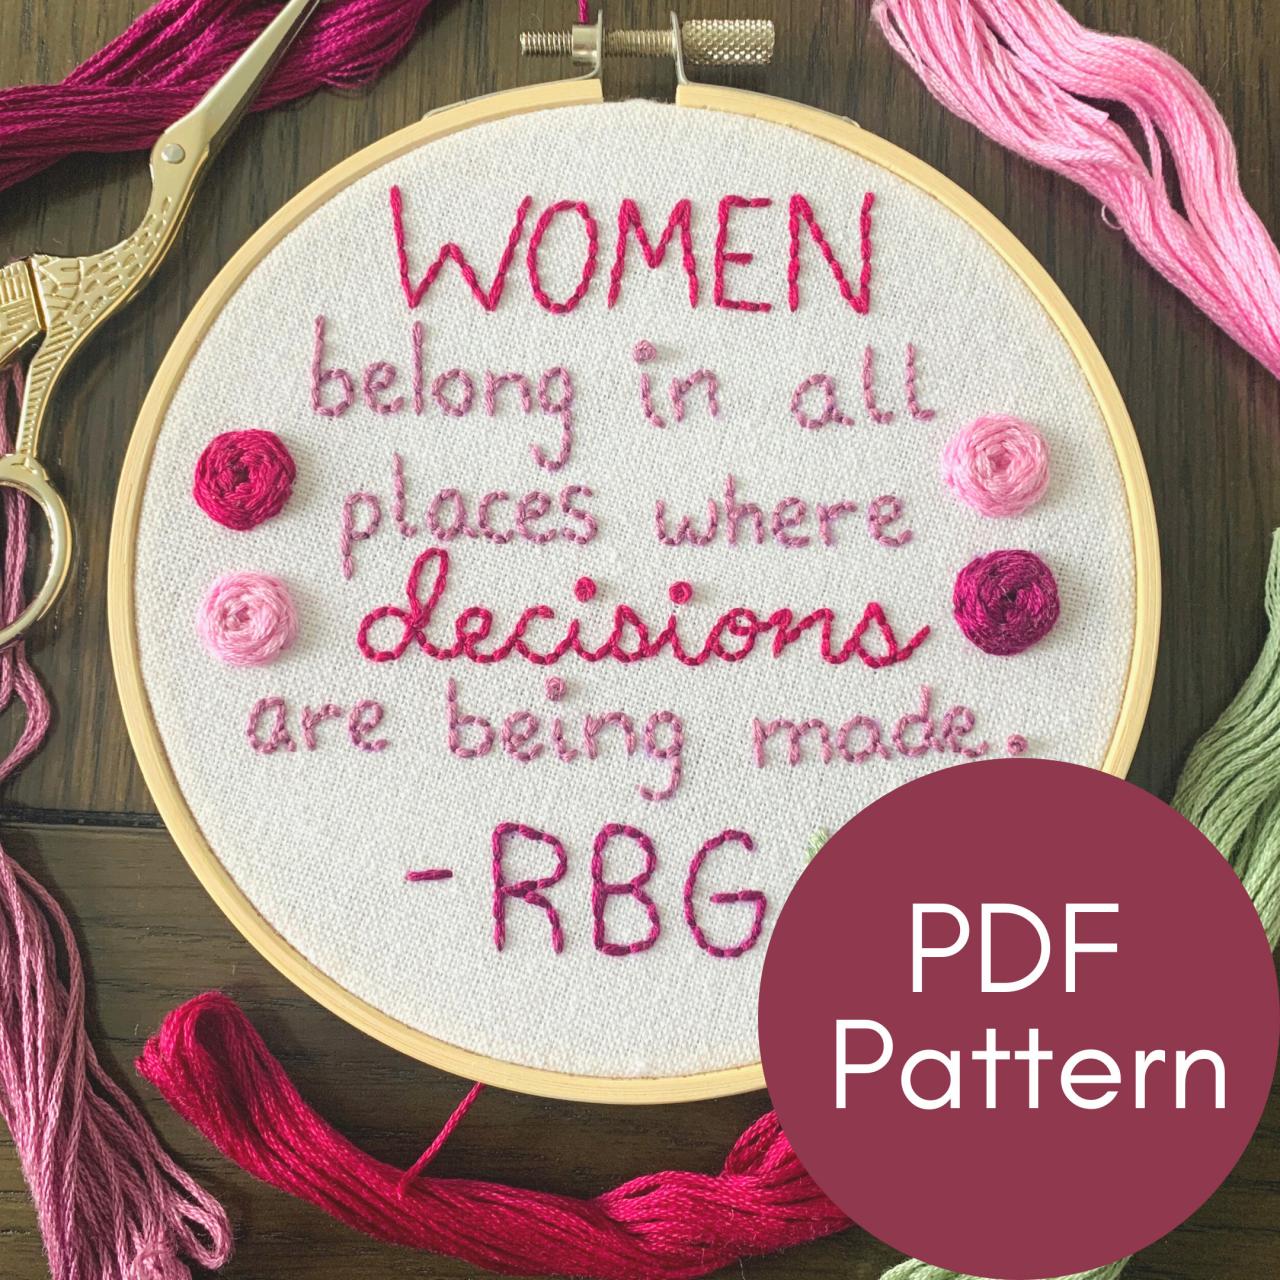 RBG Quote | RBG Embroidery | Hand Embroidery | Beginner Embroidery | Ruth Bader Ginsburg | Feminism Embroidery | Female Empowerment Gift